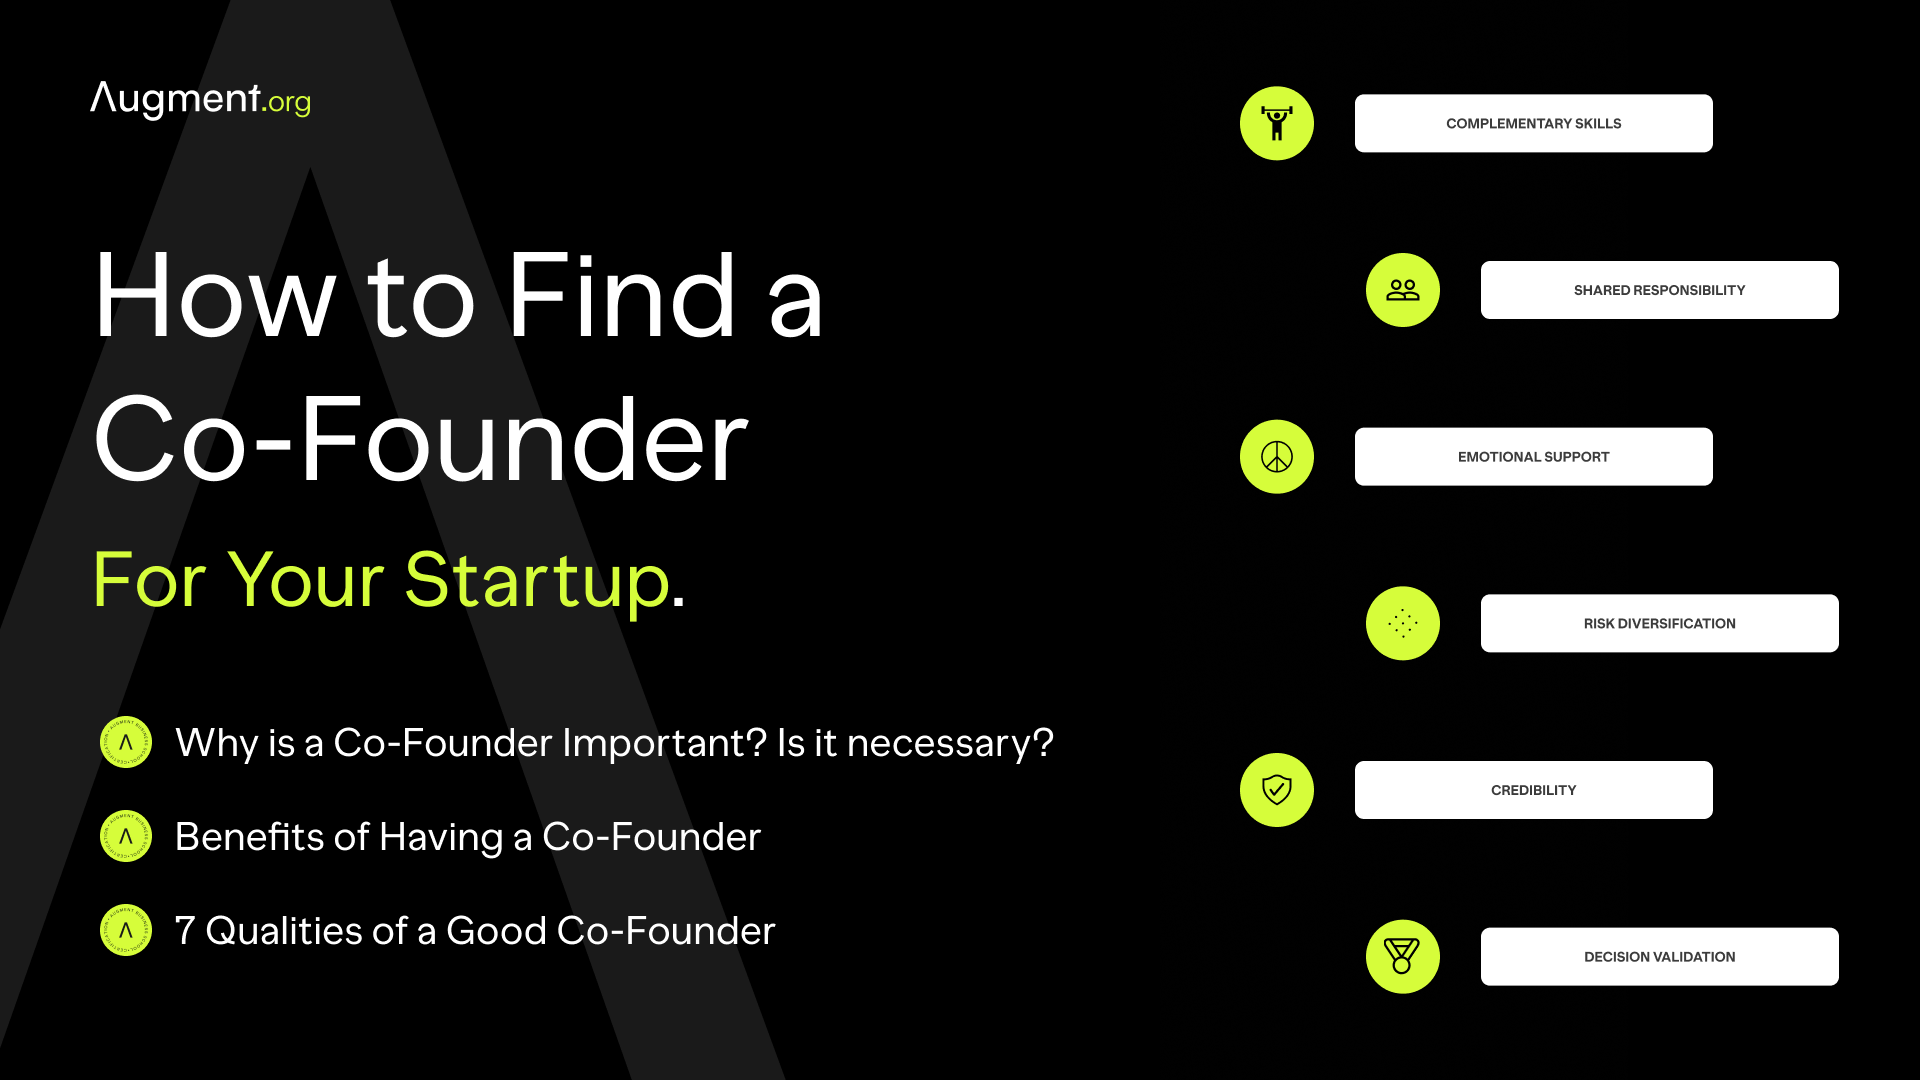 How to Find a Co-Founder for Your Startup